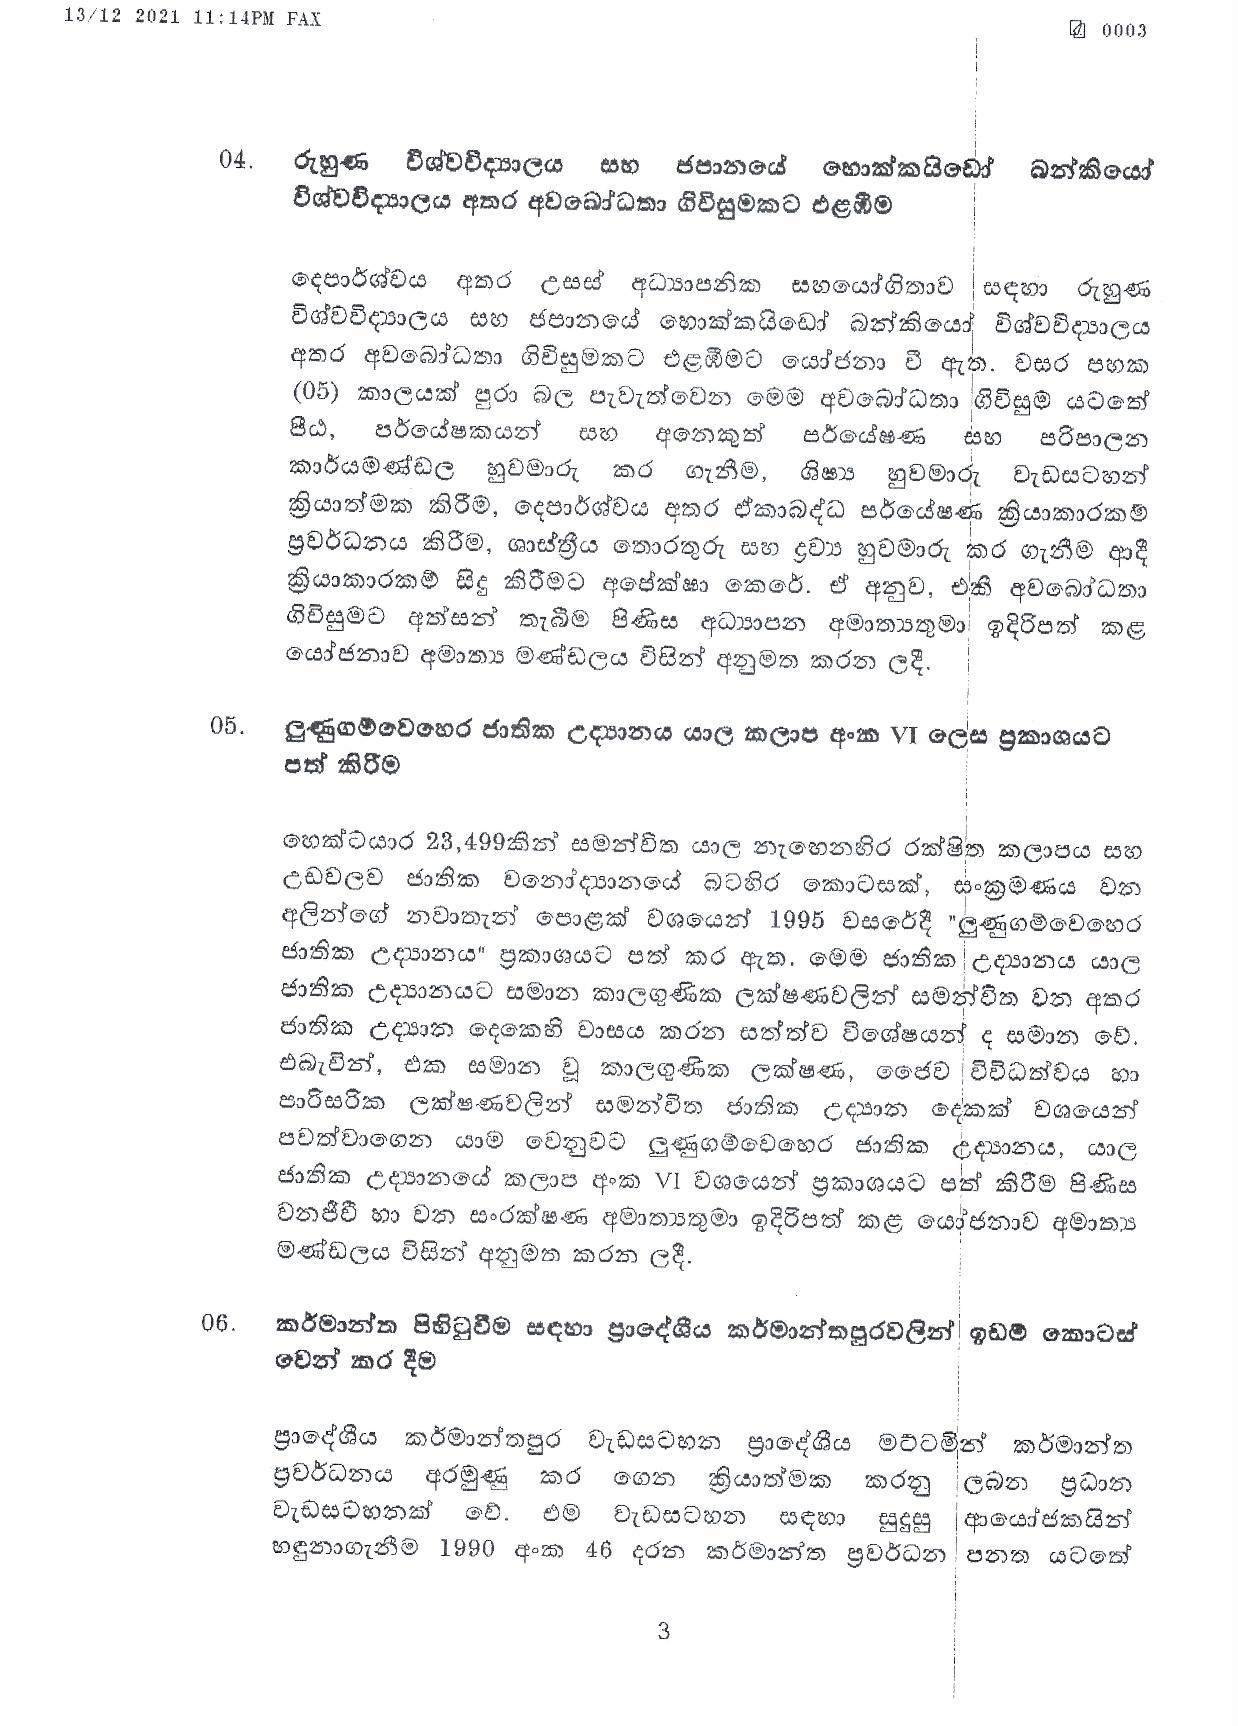 Cabinet Decision on 13.12.2021 page 001